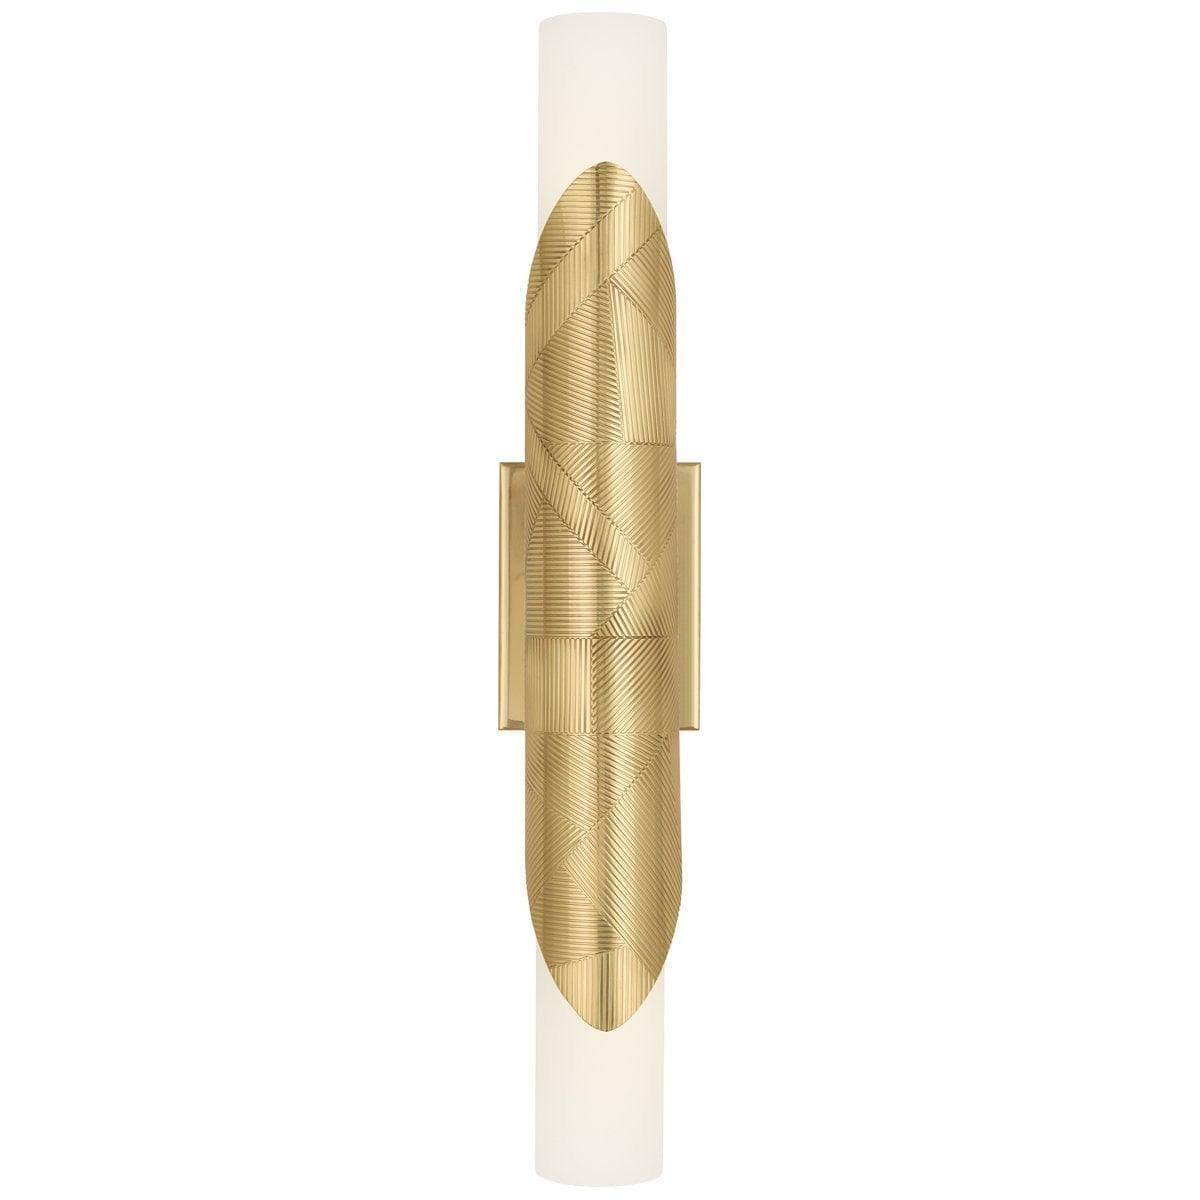 Robert Abbey - Brut Double Wall Sconce - 621 | Montreal Lighting & Hardware